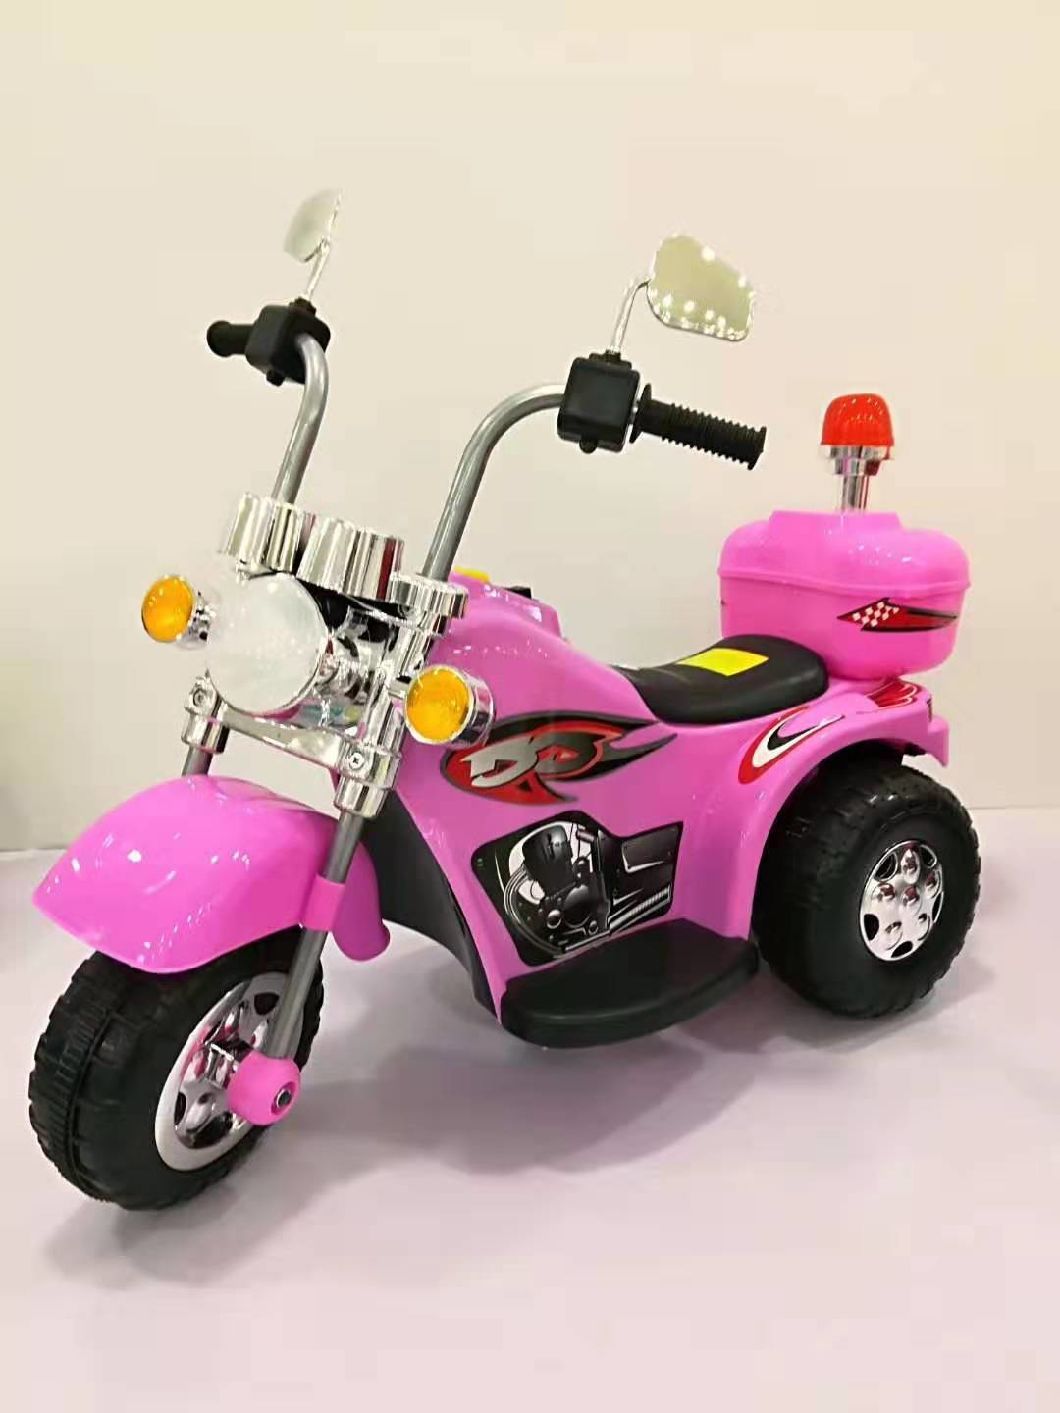 2019 New Product Baby Ride on Motorcycle for Kids Electric Motorcycle